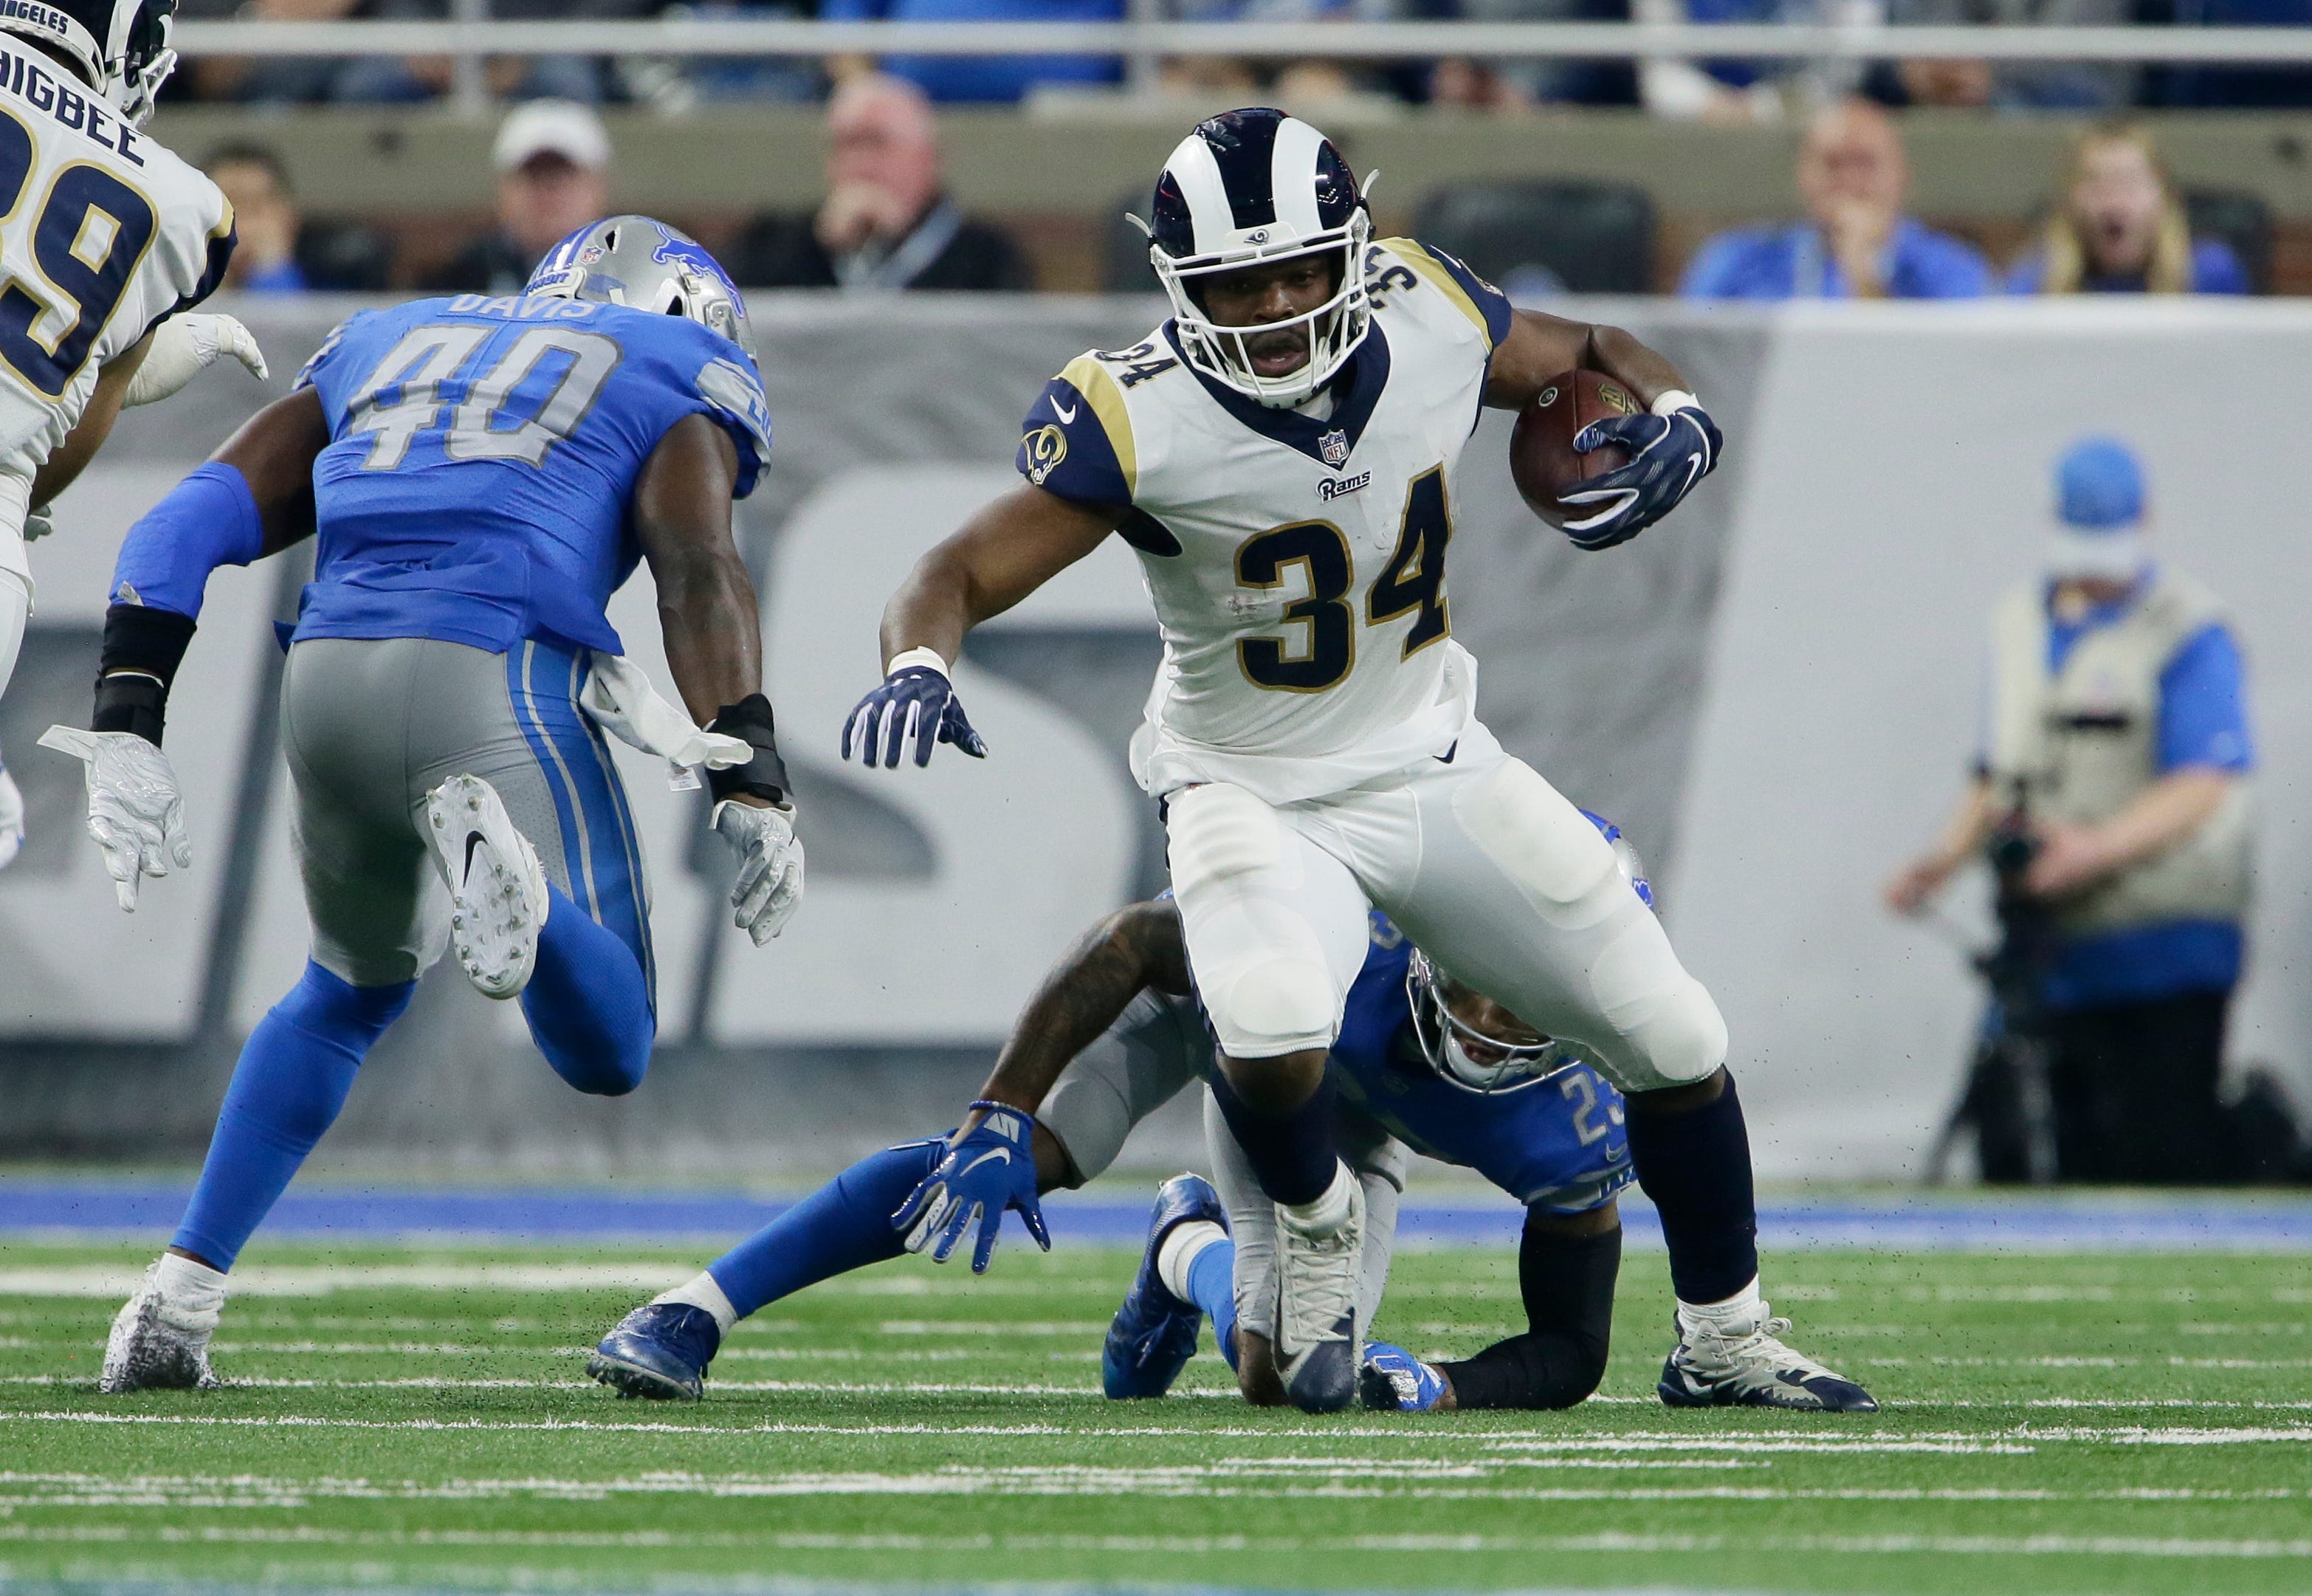 Malcolm Brown is coming off his best season, averaging 4.9 yards a carry while backing up Todd Gurley.